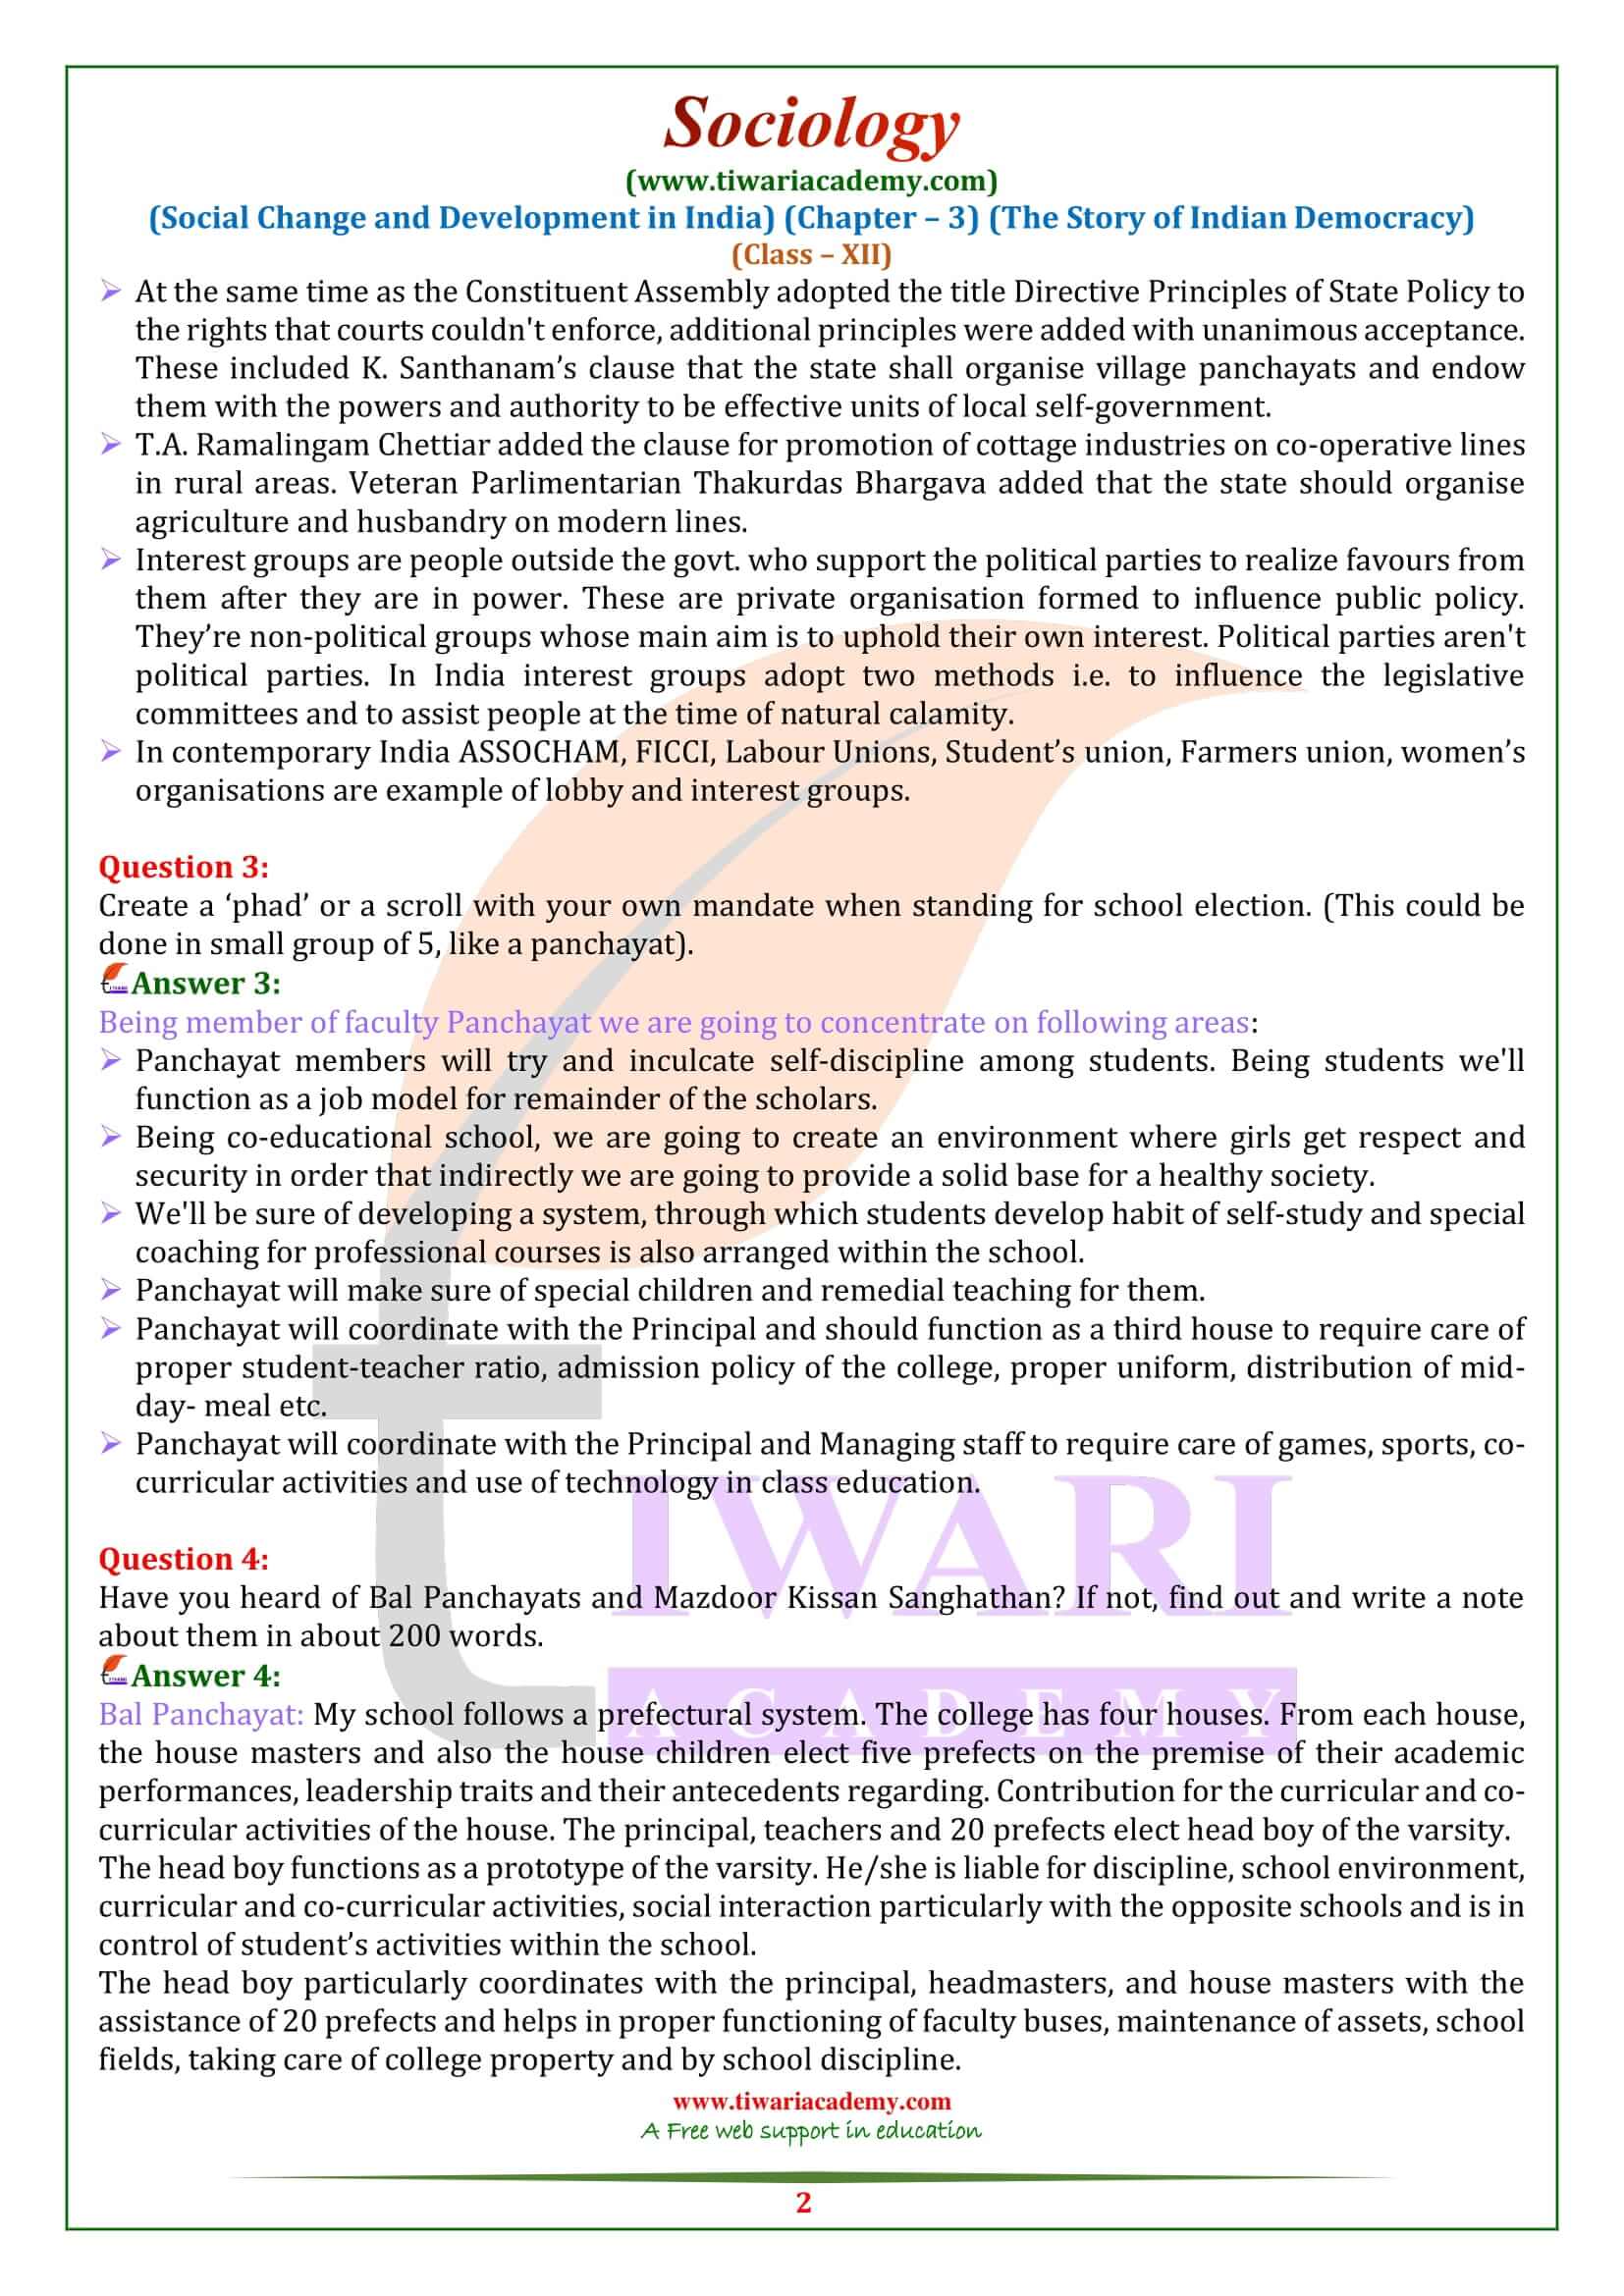 NCERT Solutions for Class 12 Sociology Chapter 3